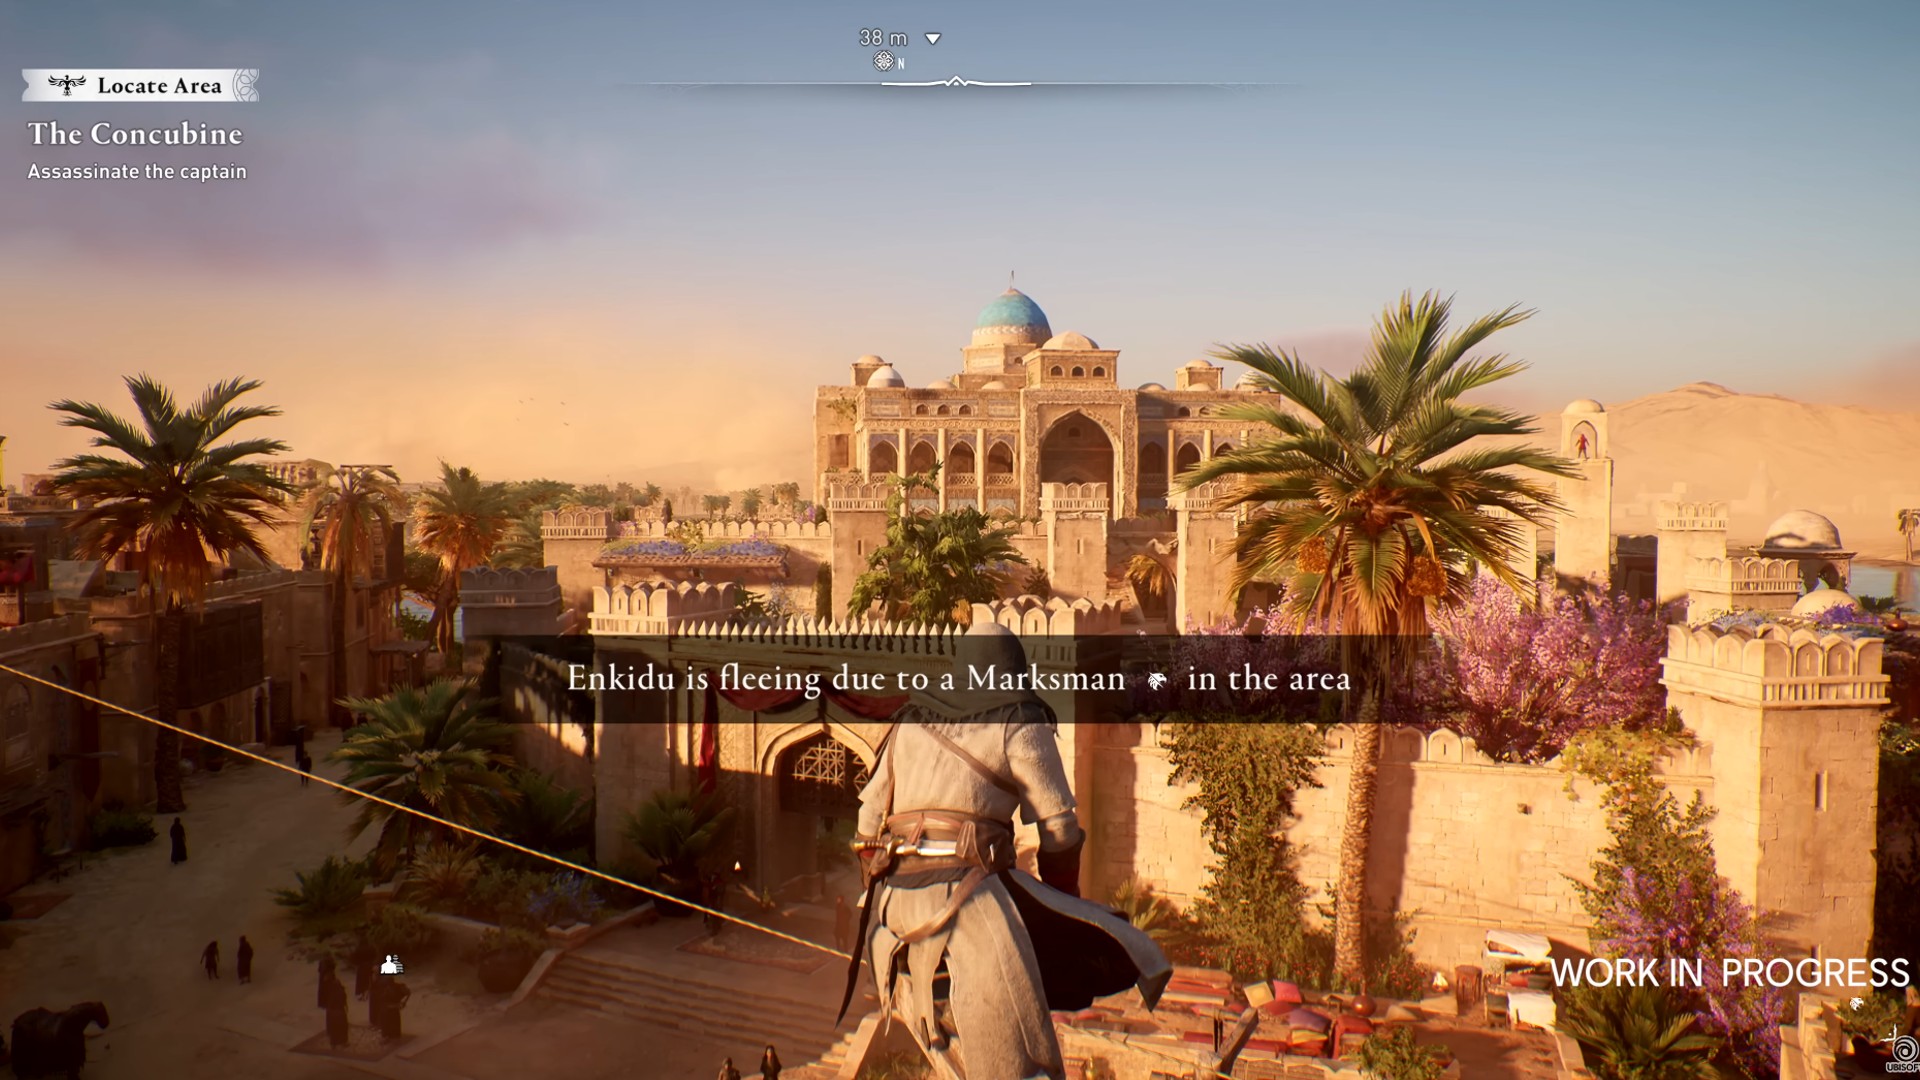 Assassin's Creed Mirage release date, gameplay and news